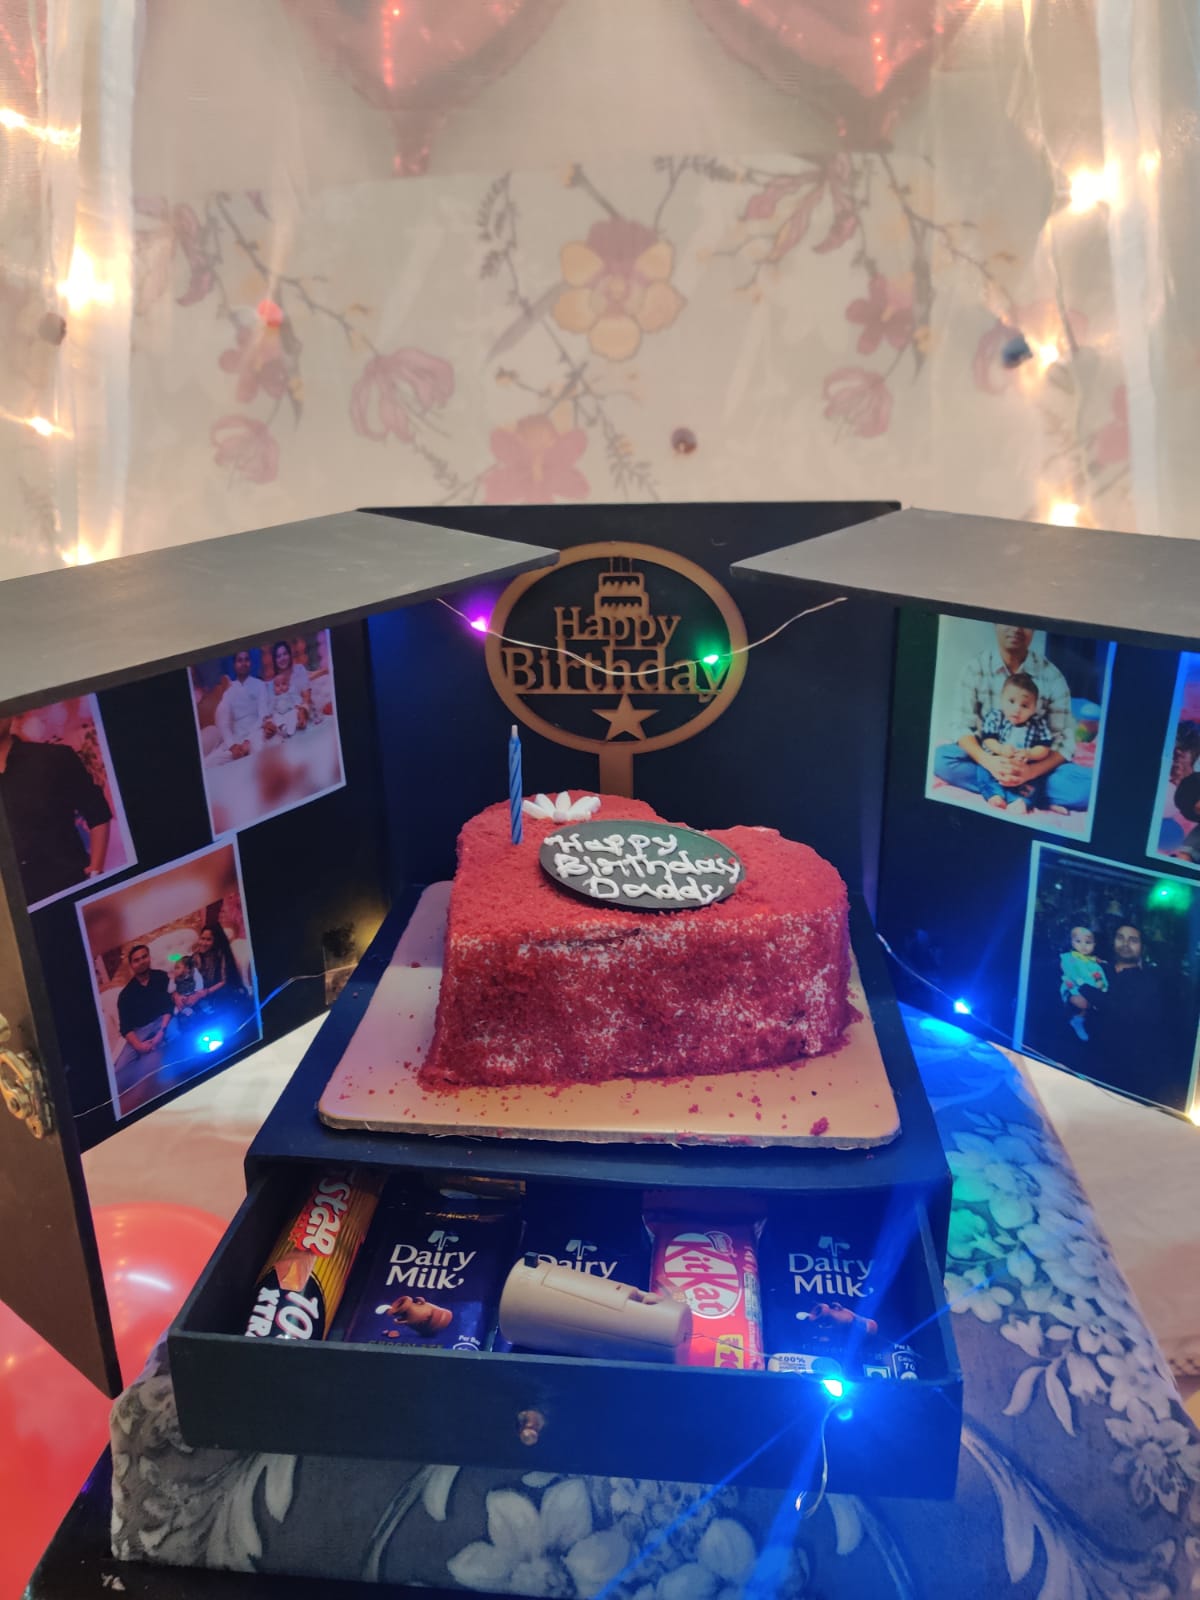 IndiaCakes | Surprise Your Partner With Mignight Cake Delivery - IndiaCakes